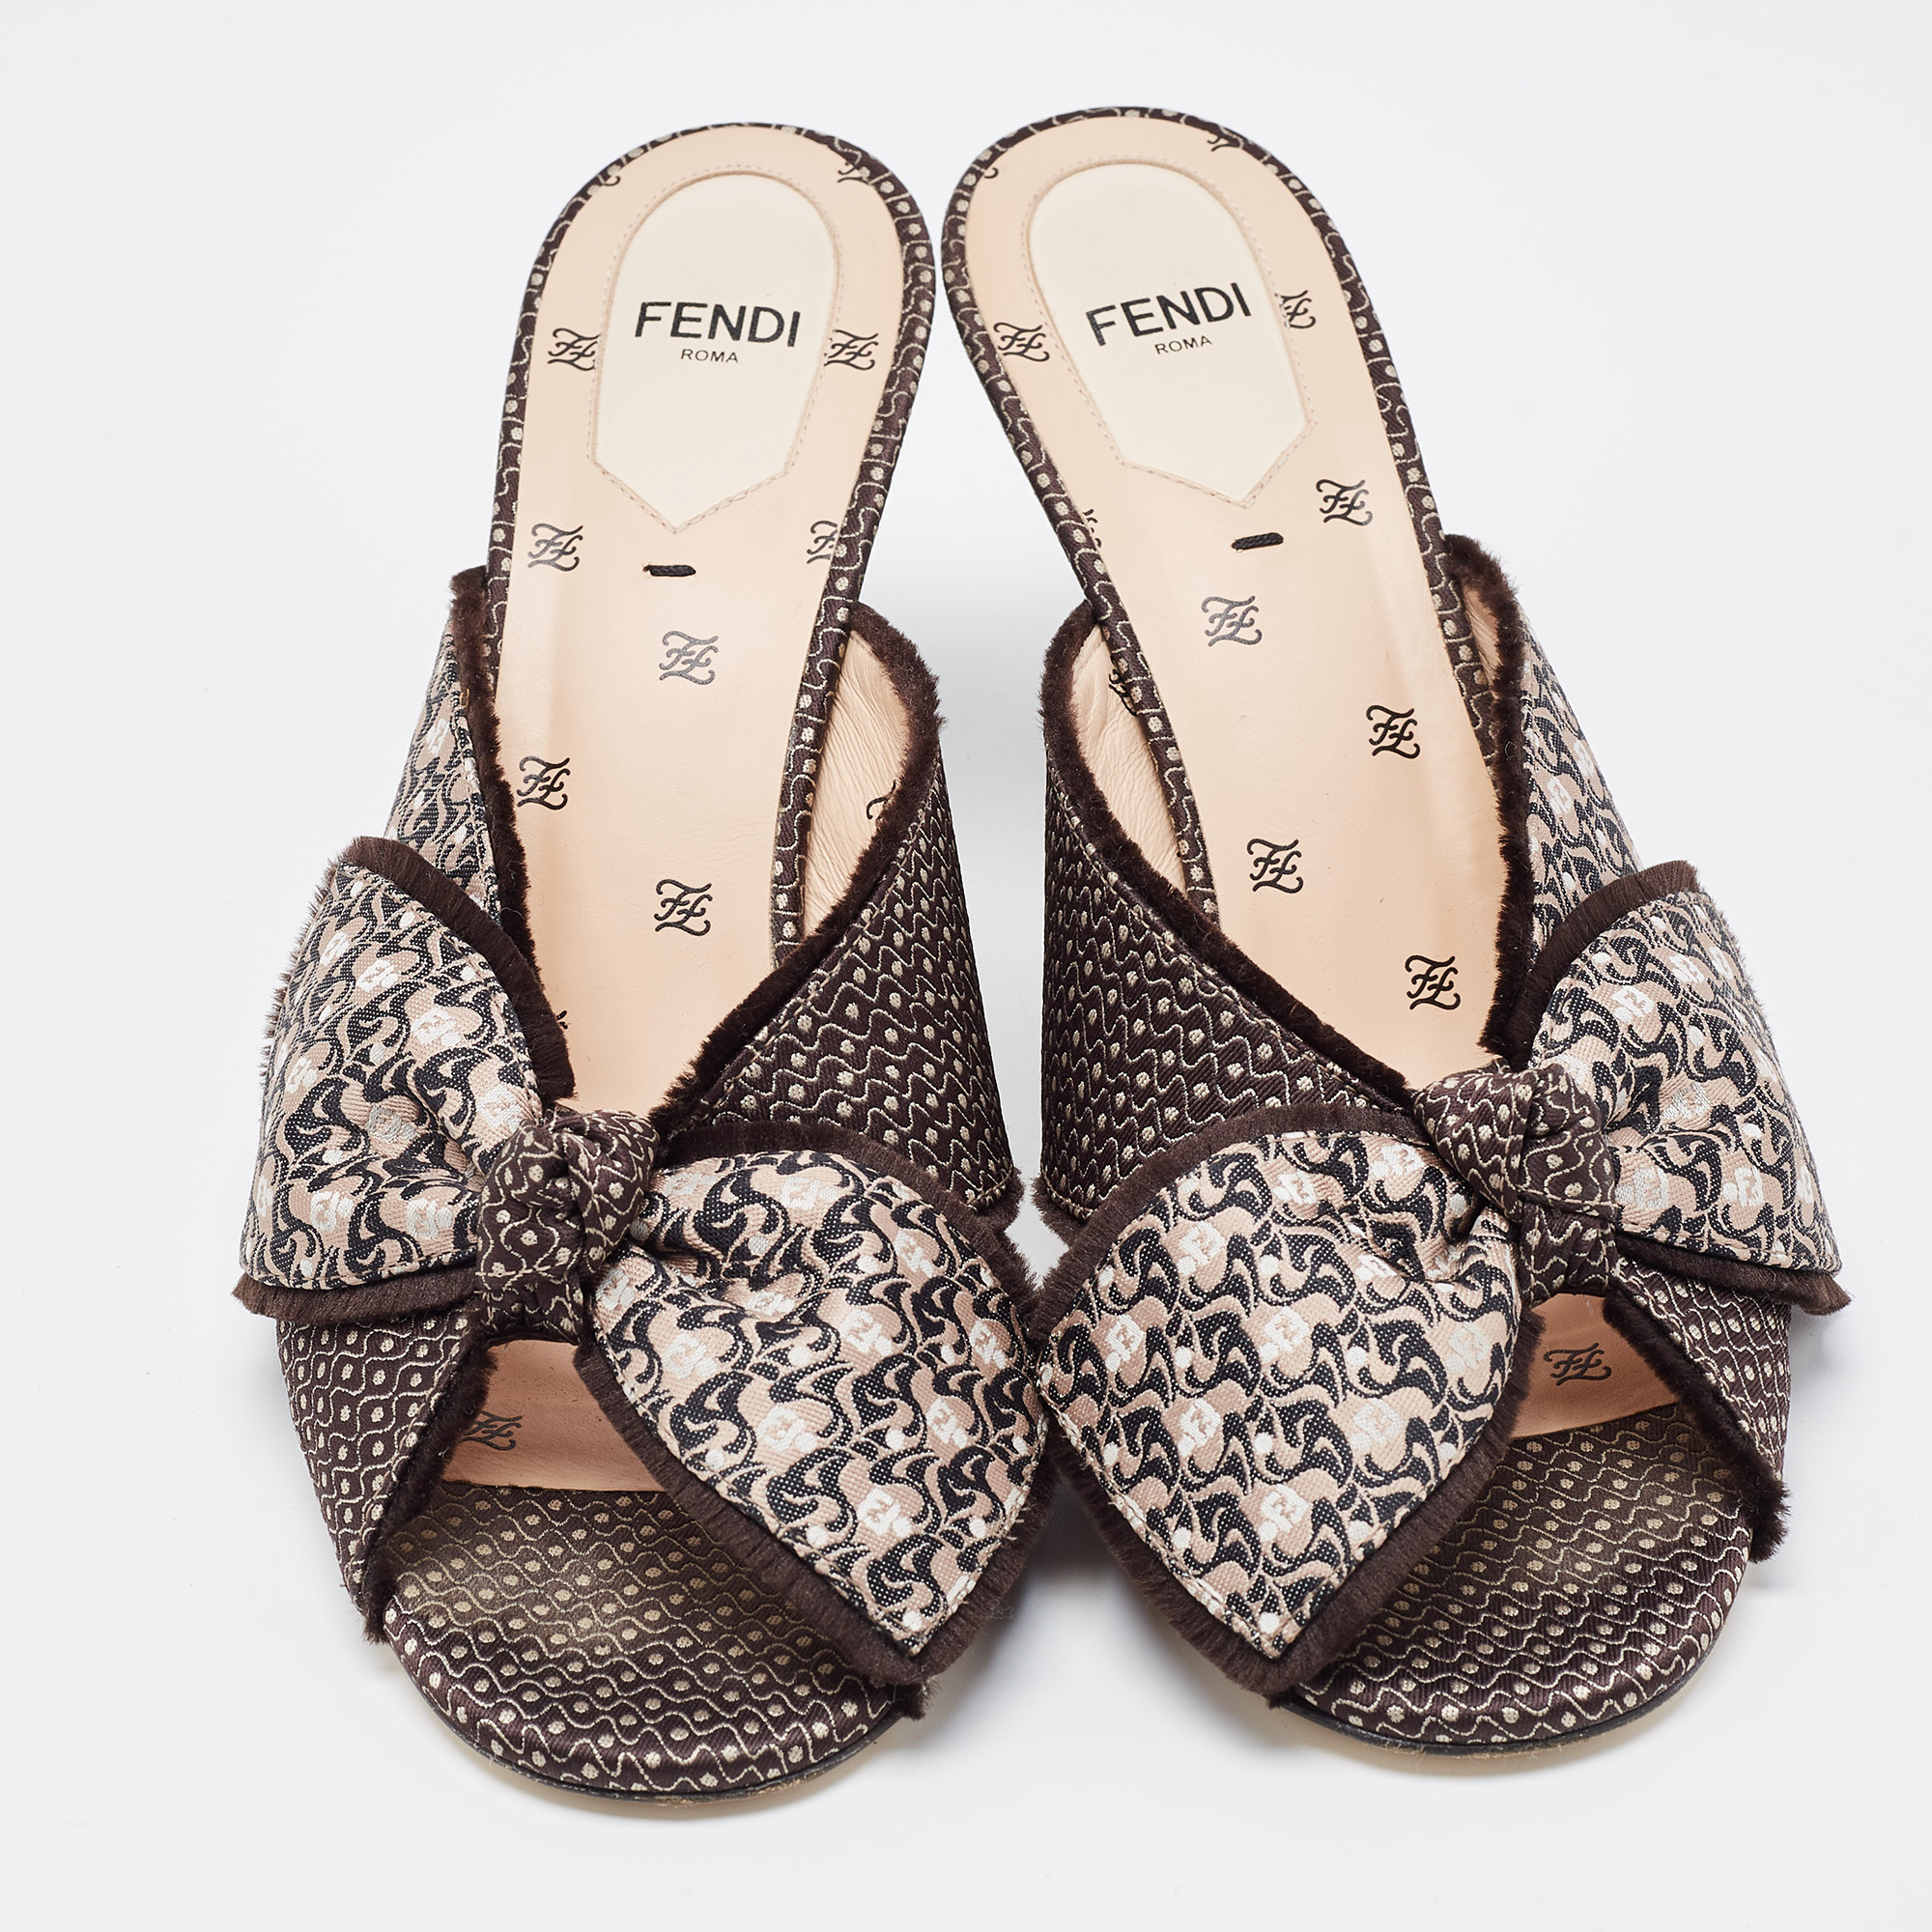 Fendi Brown/Black Fabric Knotted Mule Sandals Size 38.5